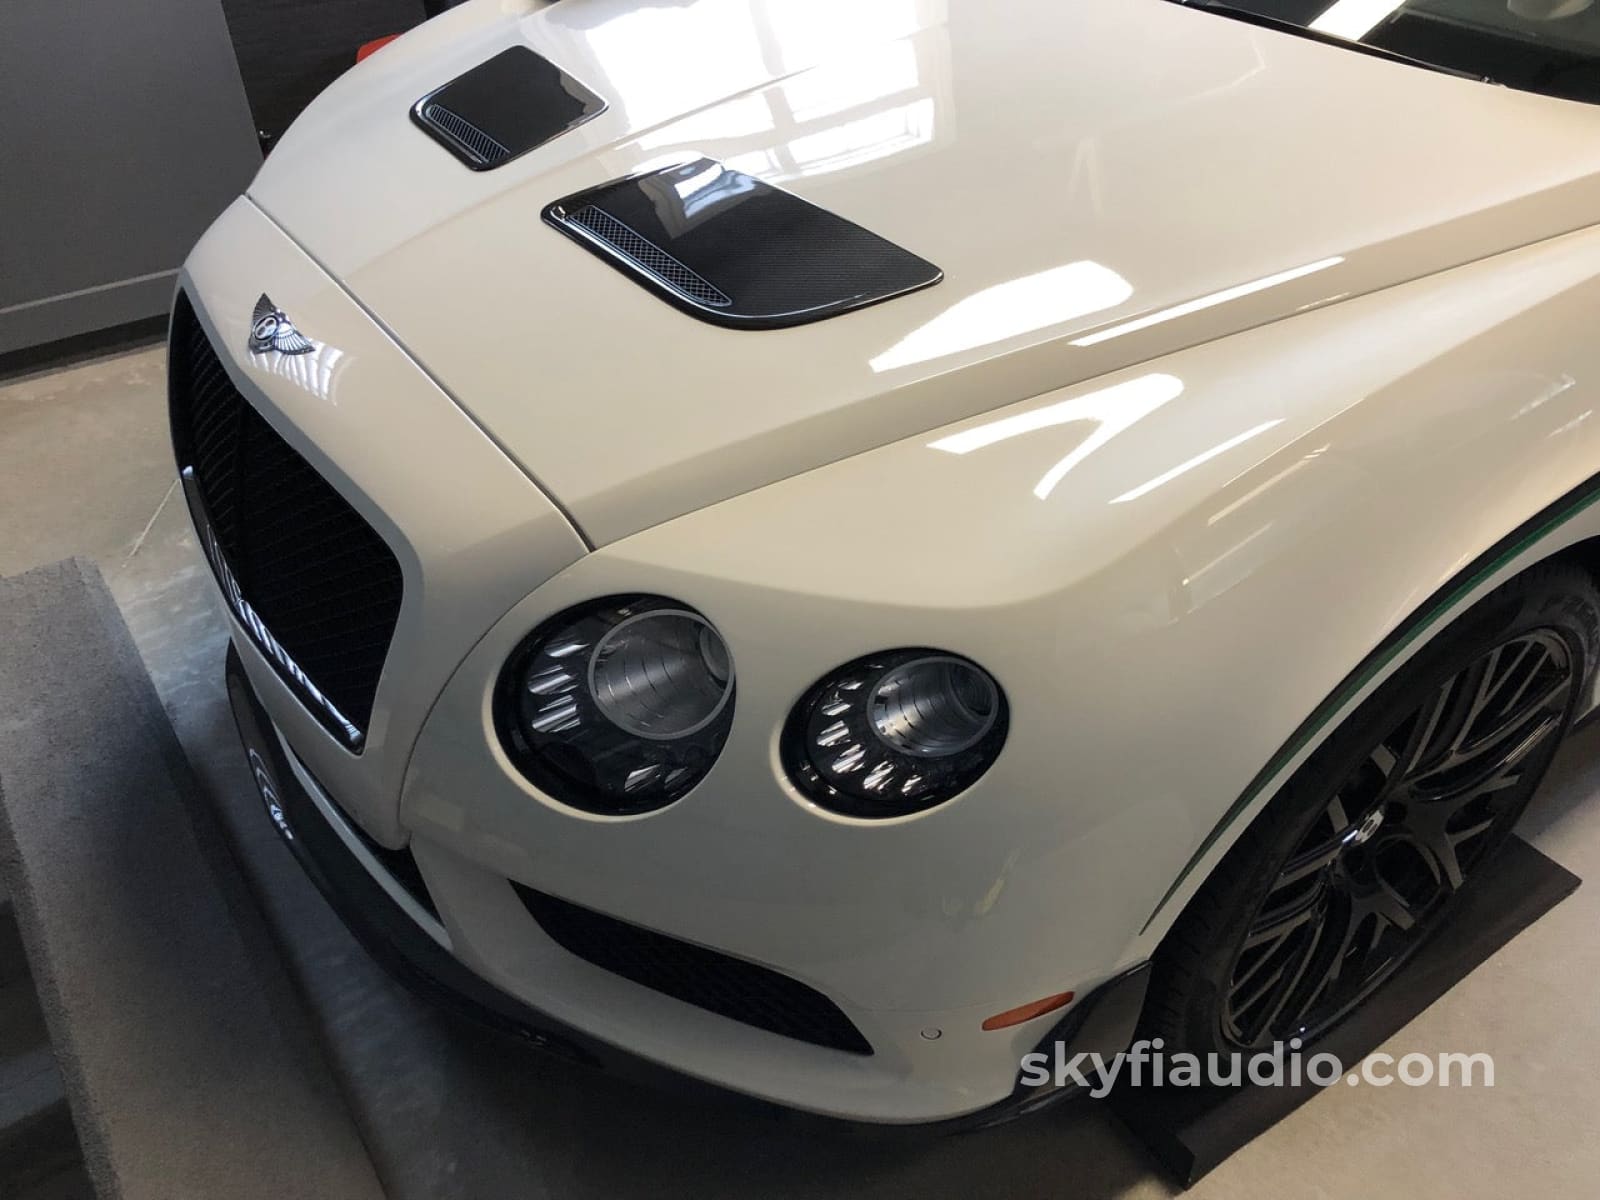 2015 Bentley Continental Gt3-R Greatest Ever Made - 1 Of 99! Vehicle